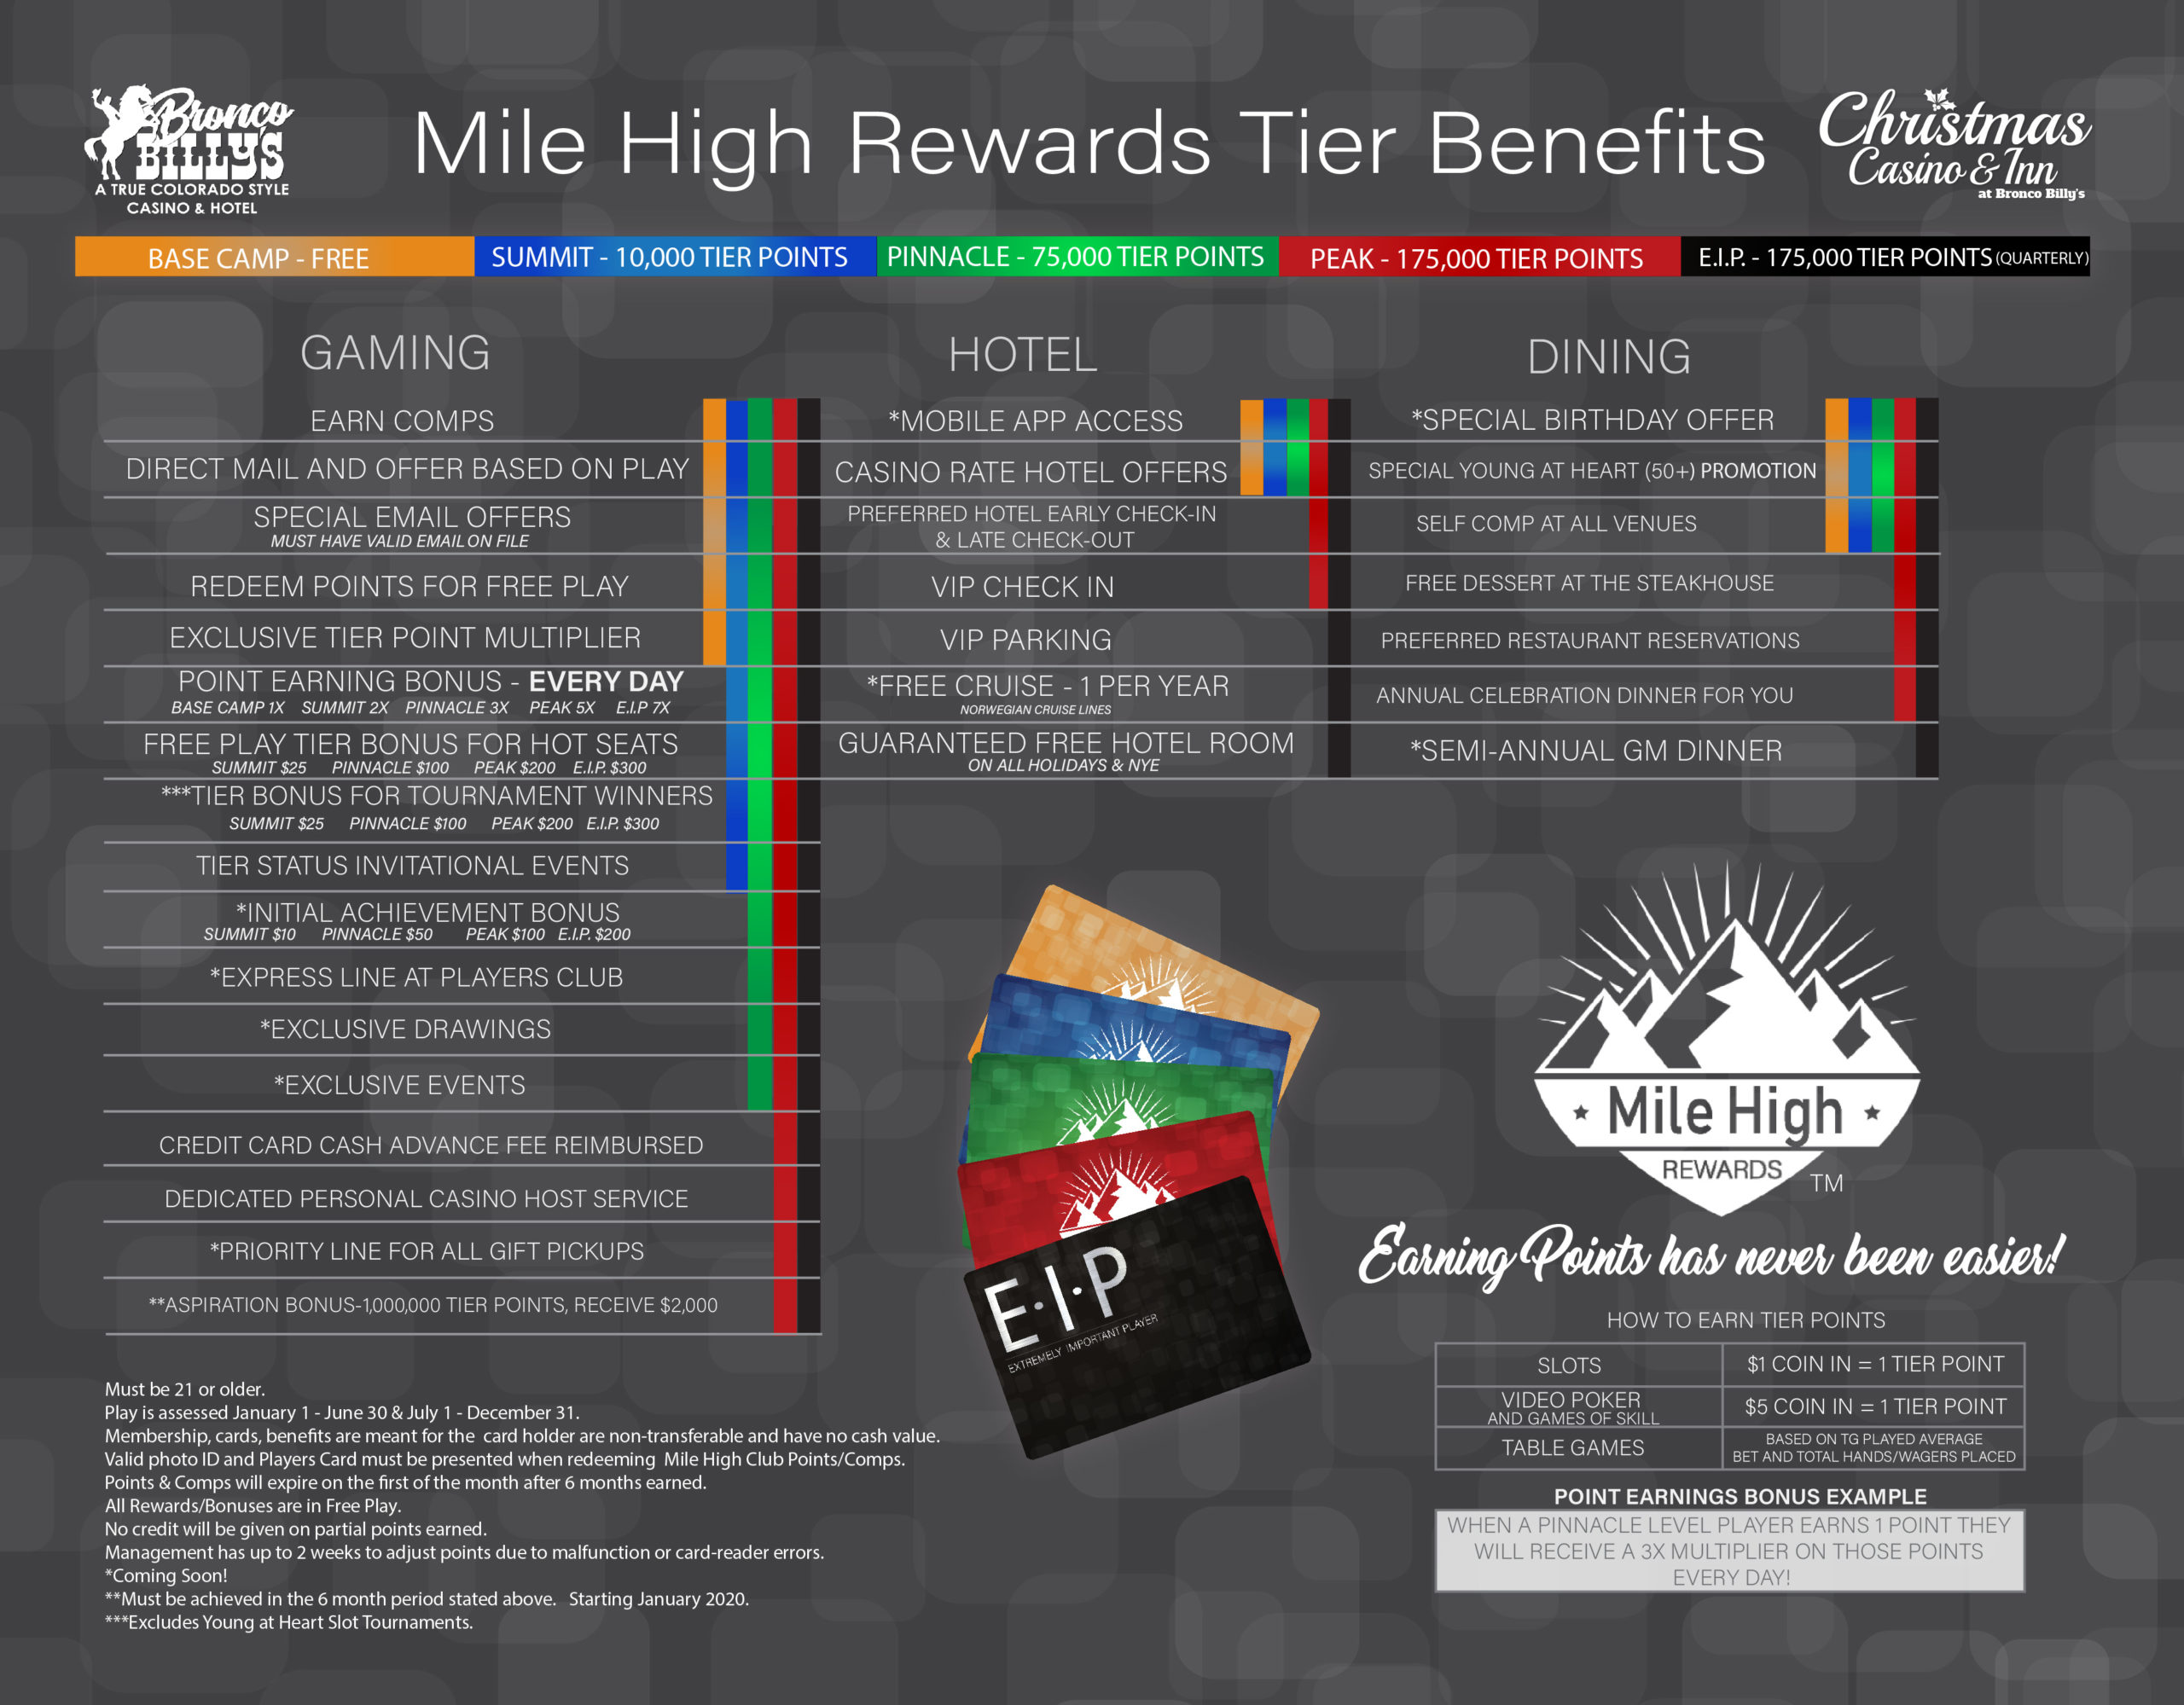 Mile High Rewards Tier Benefits at Billy's Casino , Bronco Billy's, and the Christmas Casino & Inn